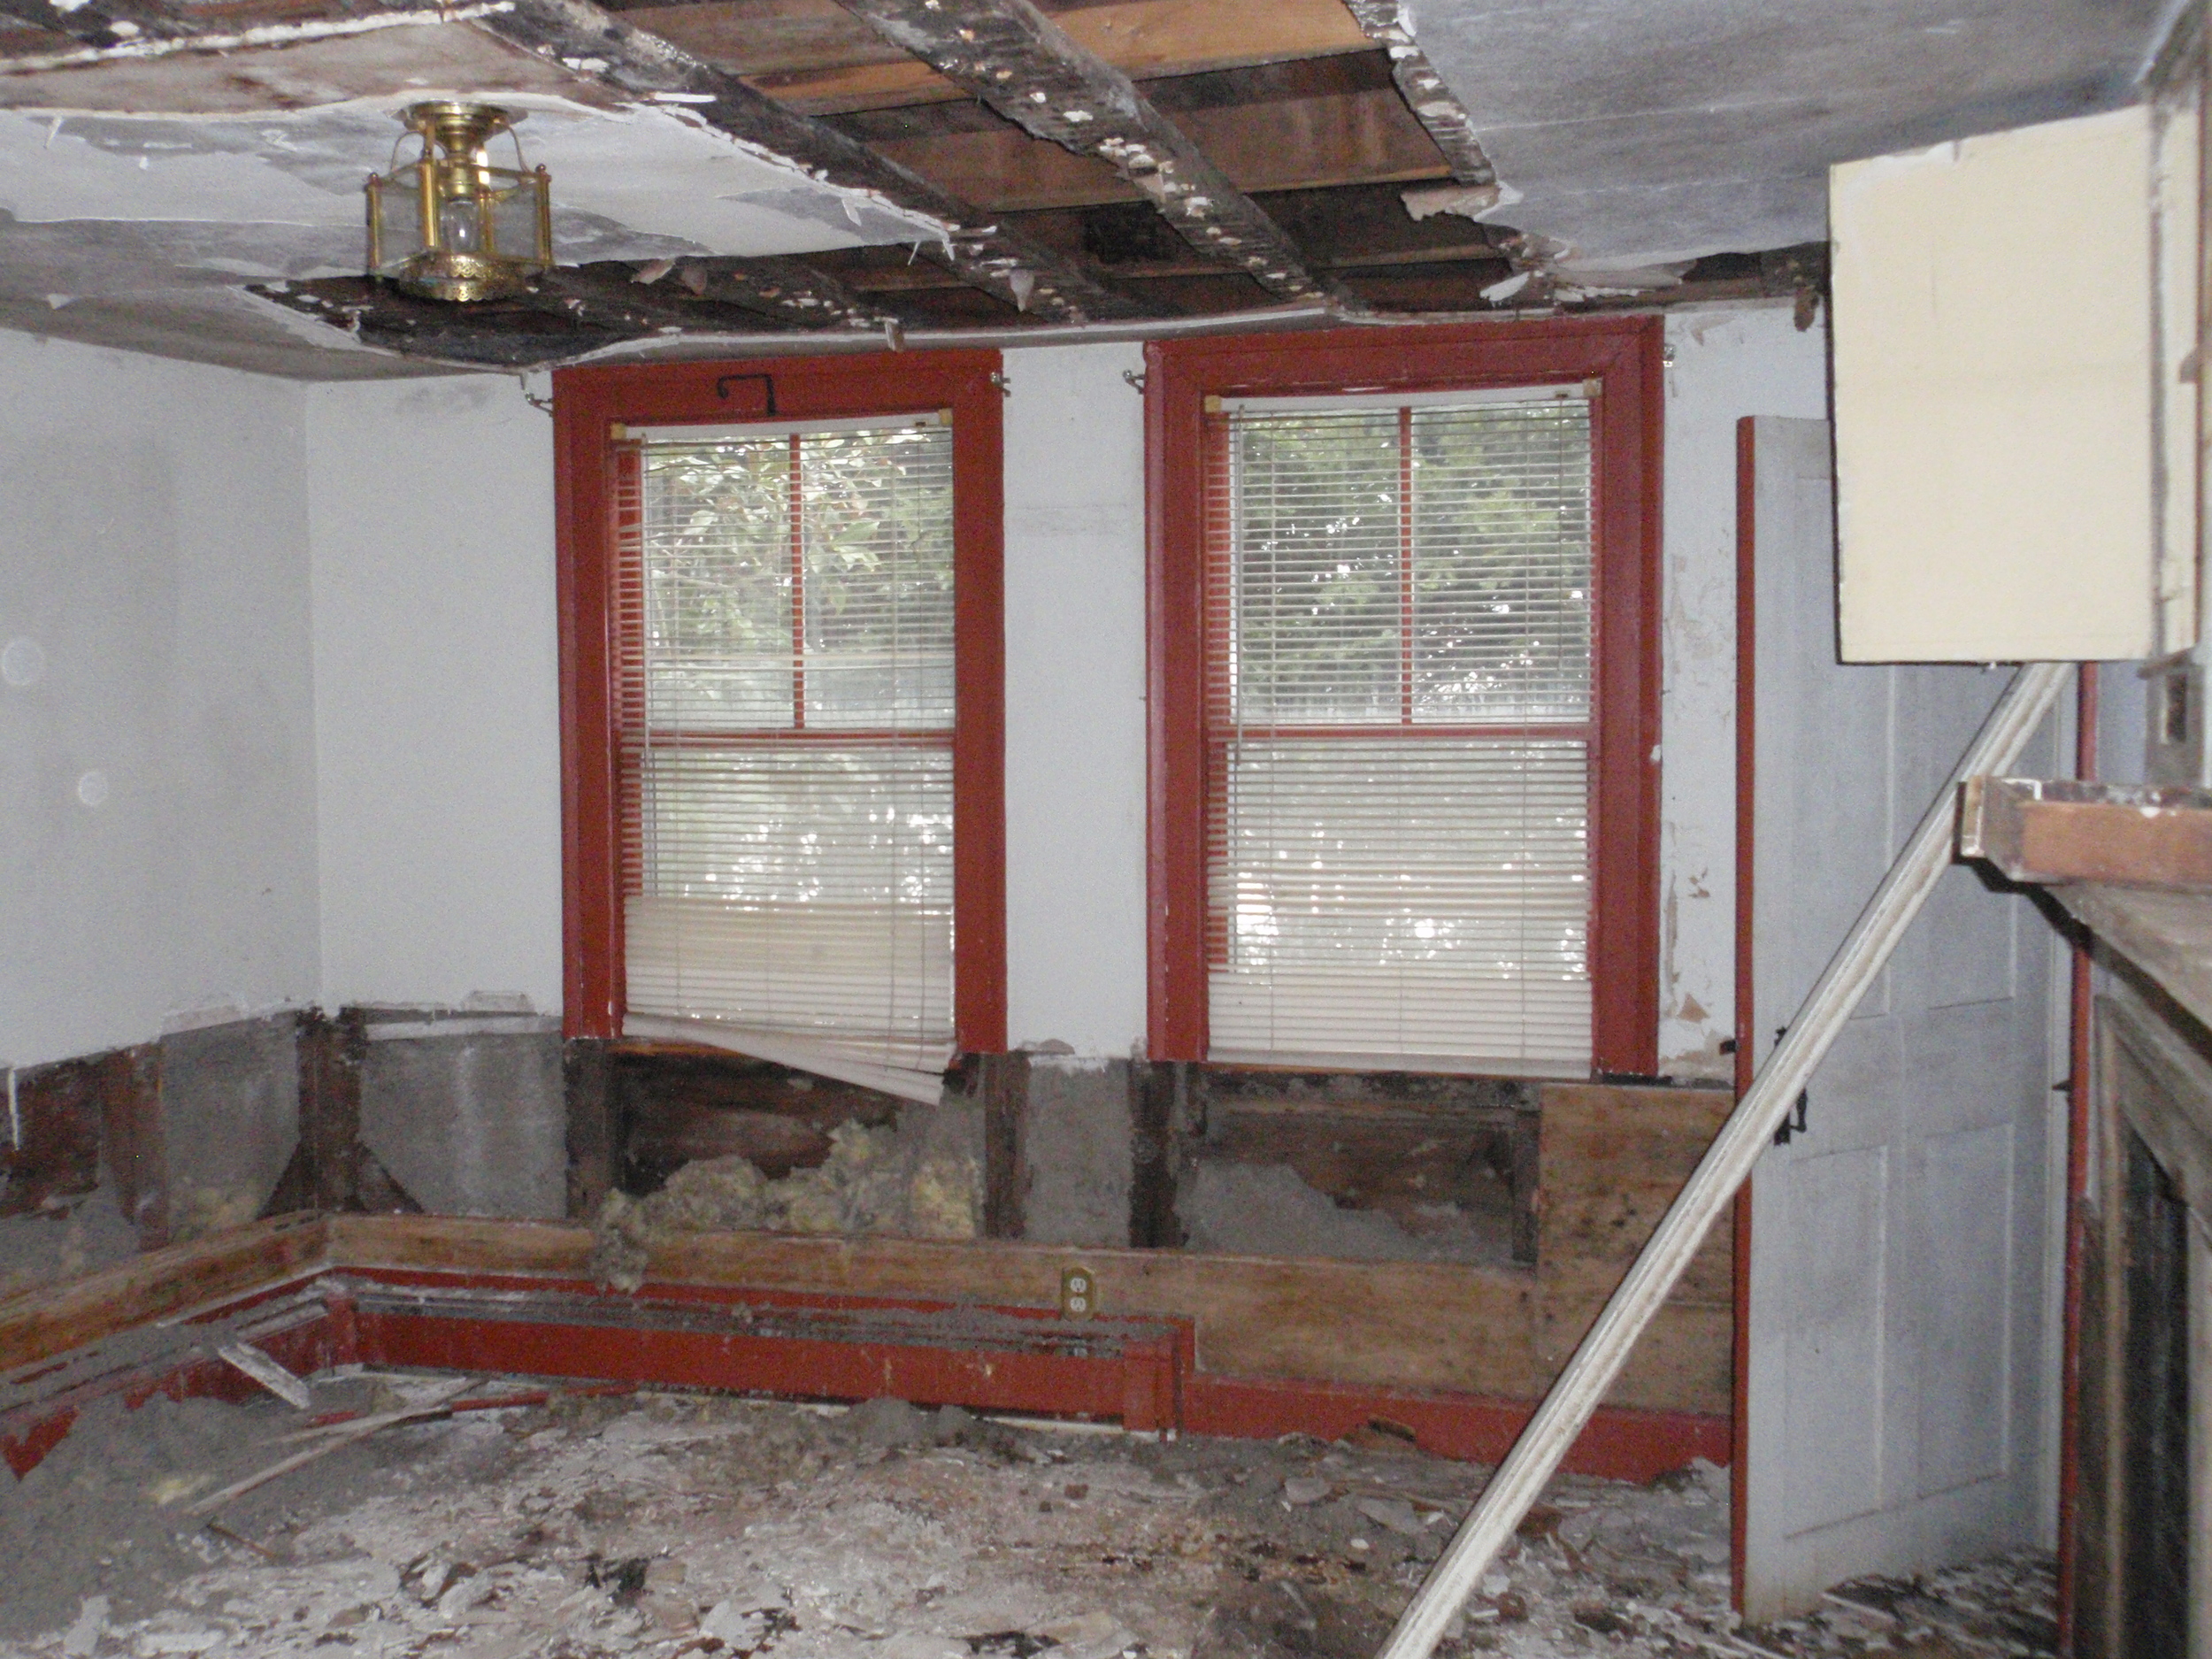  The historic kitchen has seen the most damage in the house. Original paneling has been pulled from the walls and some of the ceiling plaster has been taken down. 